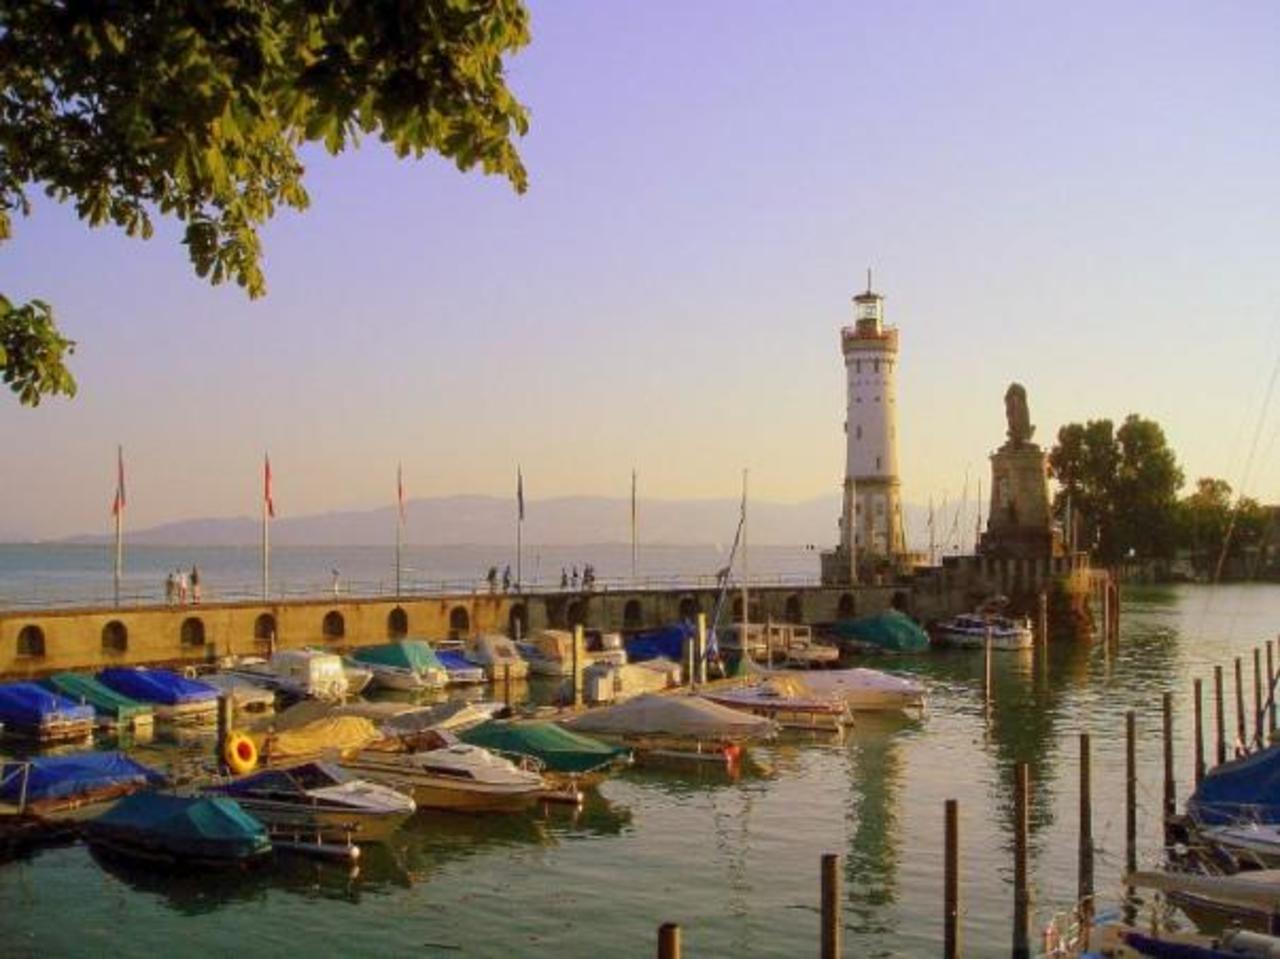 Lindau, Germany, one of the best island city in the world. #travel #island @lonelyplanet @AmazingPlacex http://t.co/7M5DnLtt1L